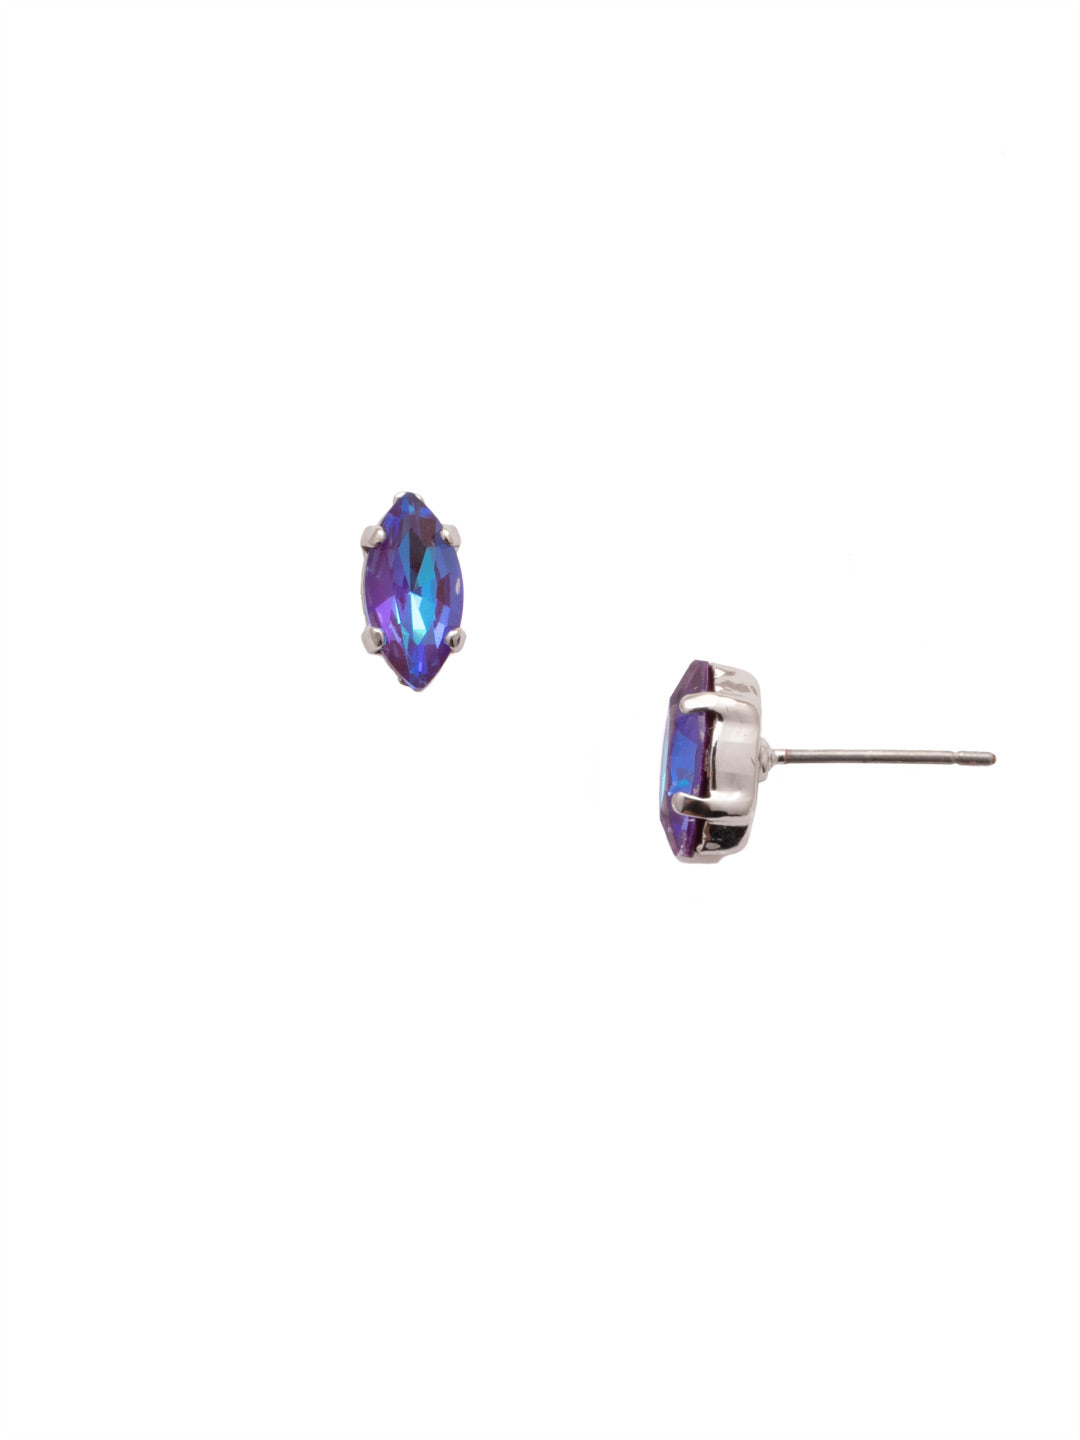 Clarissa Stud Earrings - EEP4PDSIP - The Clarissa Stud Earring is for the lover of classics with a twist. Simple sparkling crystals get an oomph from the navette shape. From Sorrelli's Sienna Plum collection in our Palladium finish.